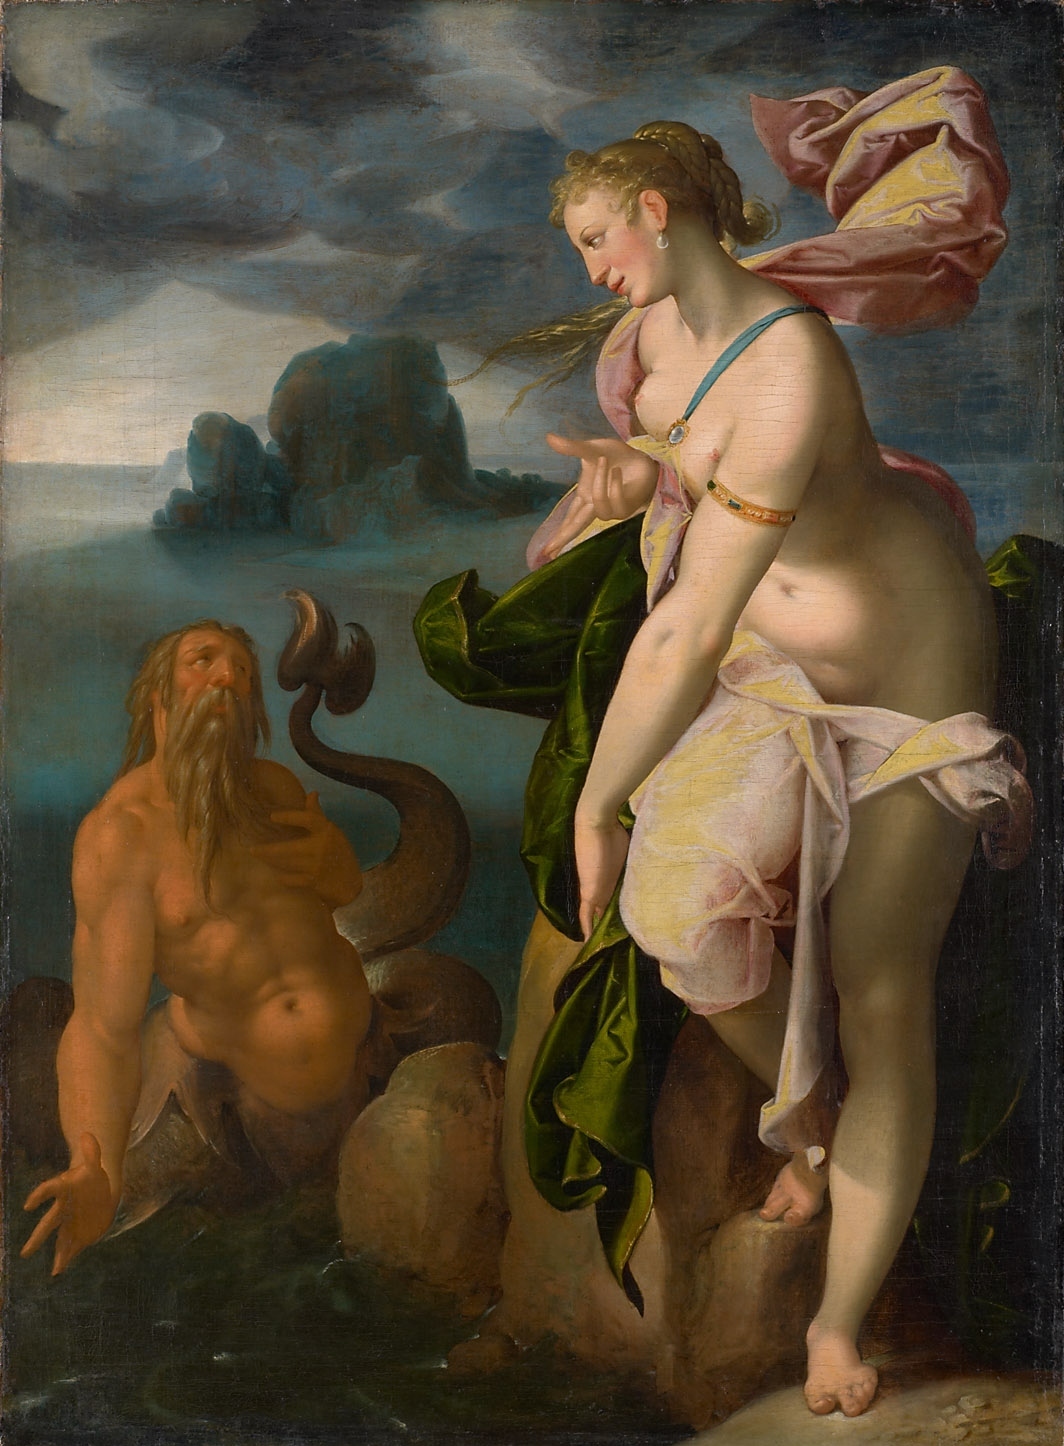 A merman looks up towards a partially nude woman who looks towards him and the sea behind him.